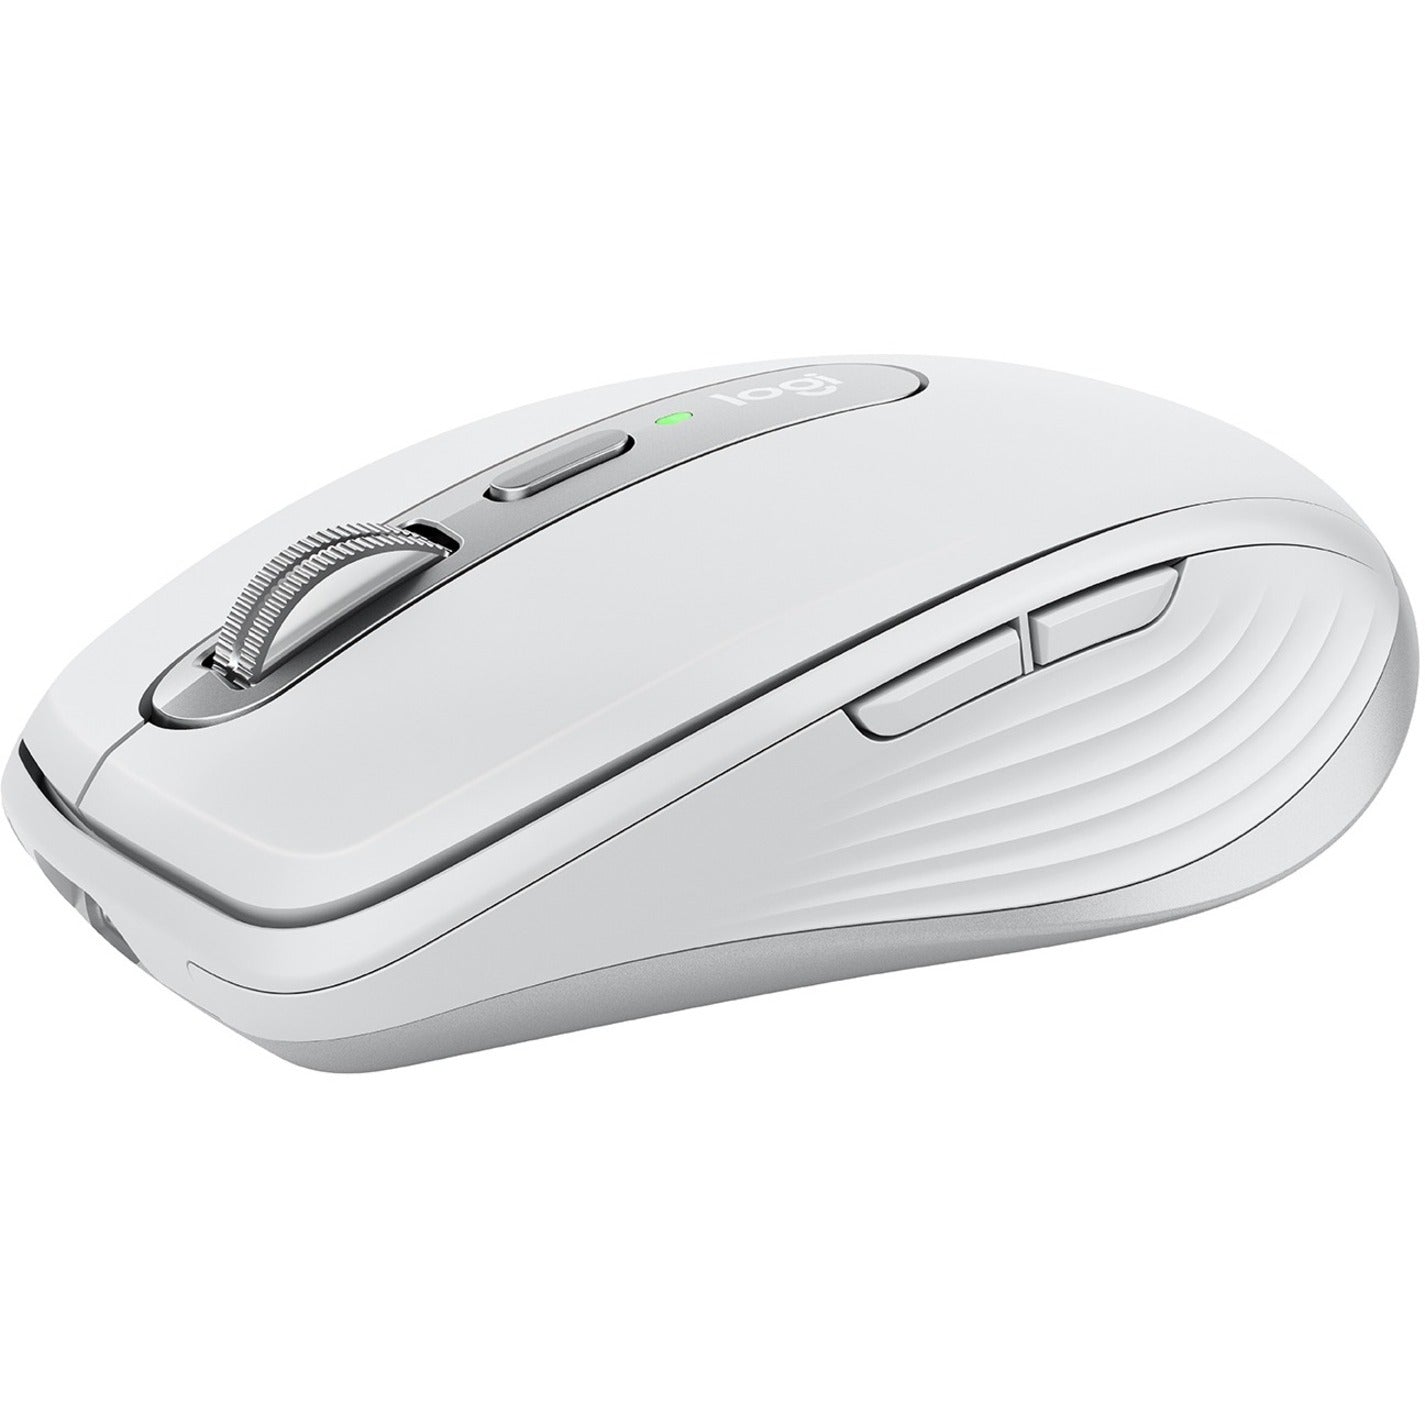 Logitech 910-005899 MX Anywhere 3 For Mac, Wireless Mouse with Darkfield Scroller, 4000 dpi